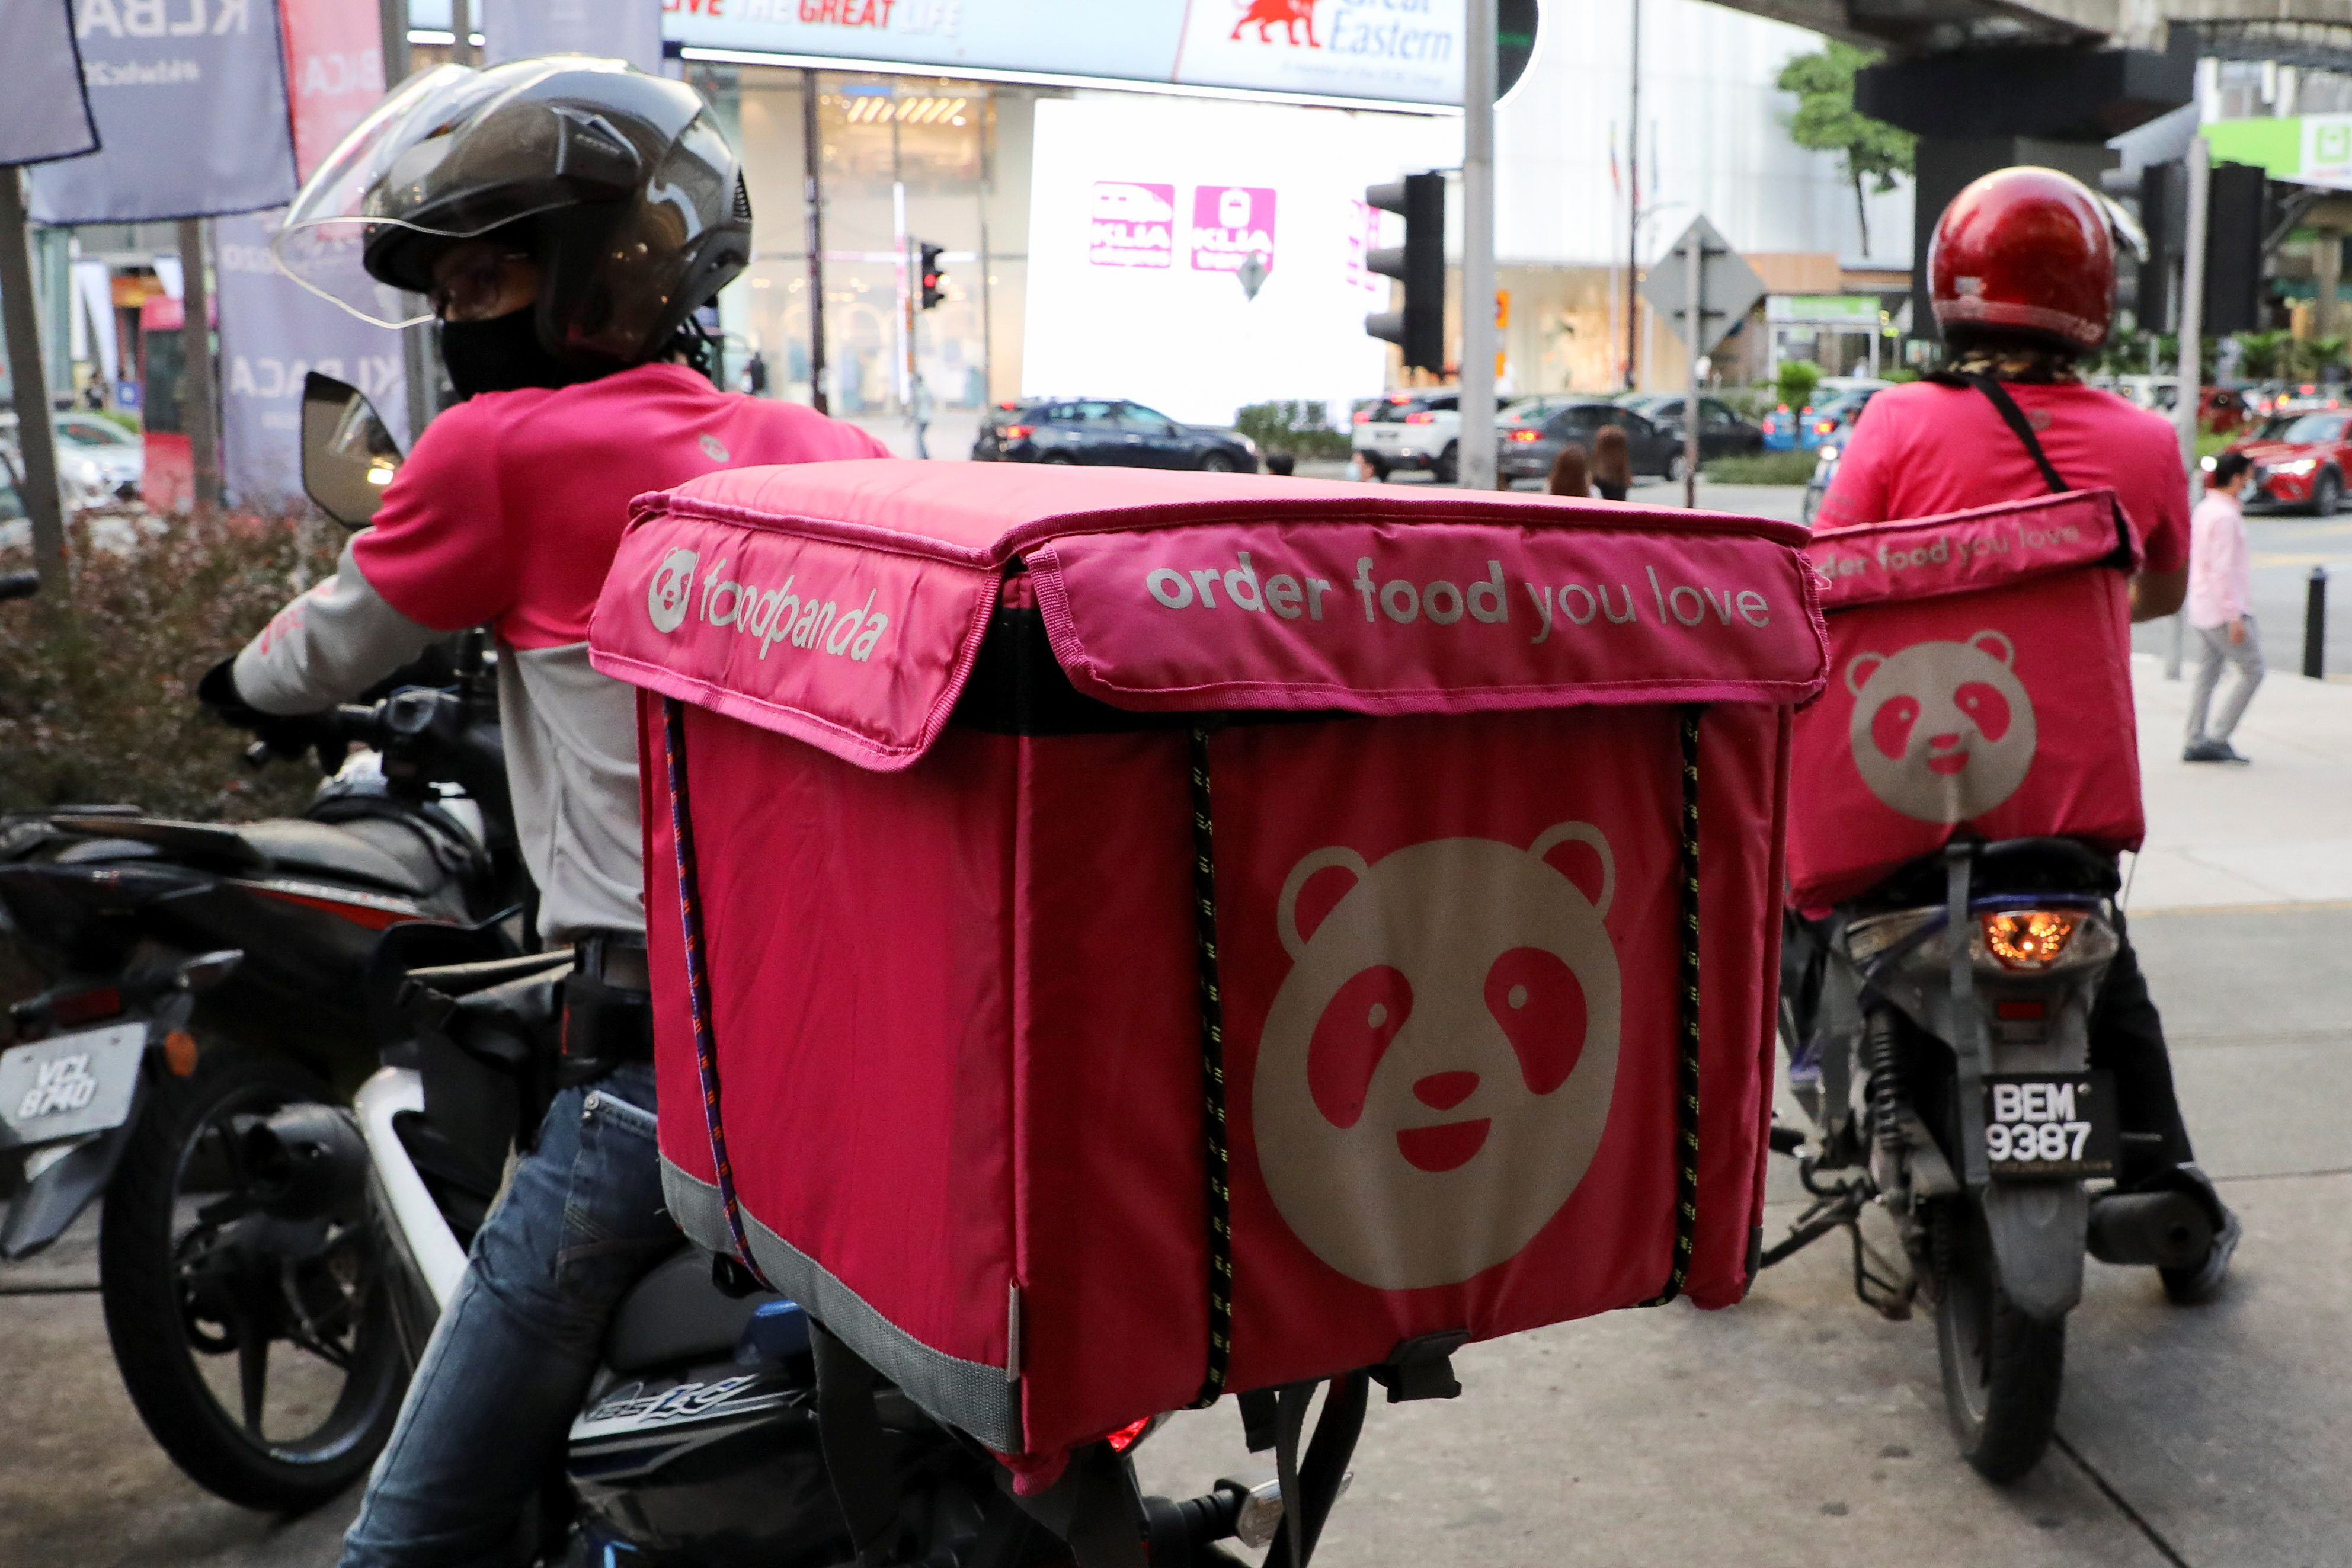 Foodpanda riders get ready for deliveries outside a restaurant, amid the coronavirus disease (COVID-19) outbreak in Kuala Lumpur